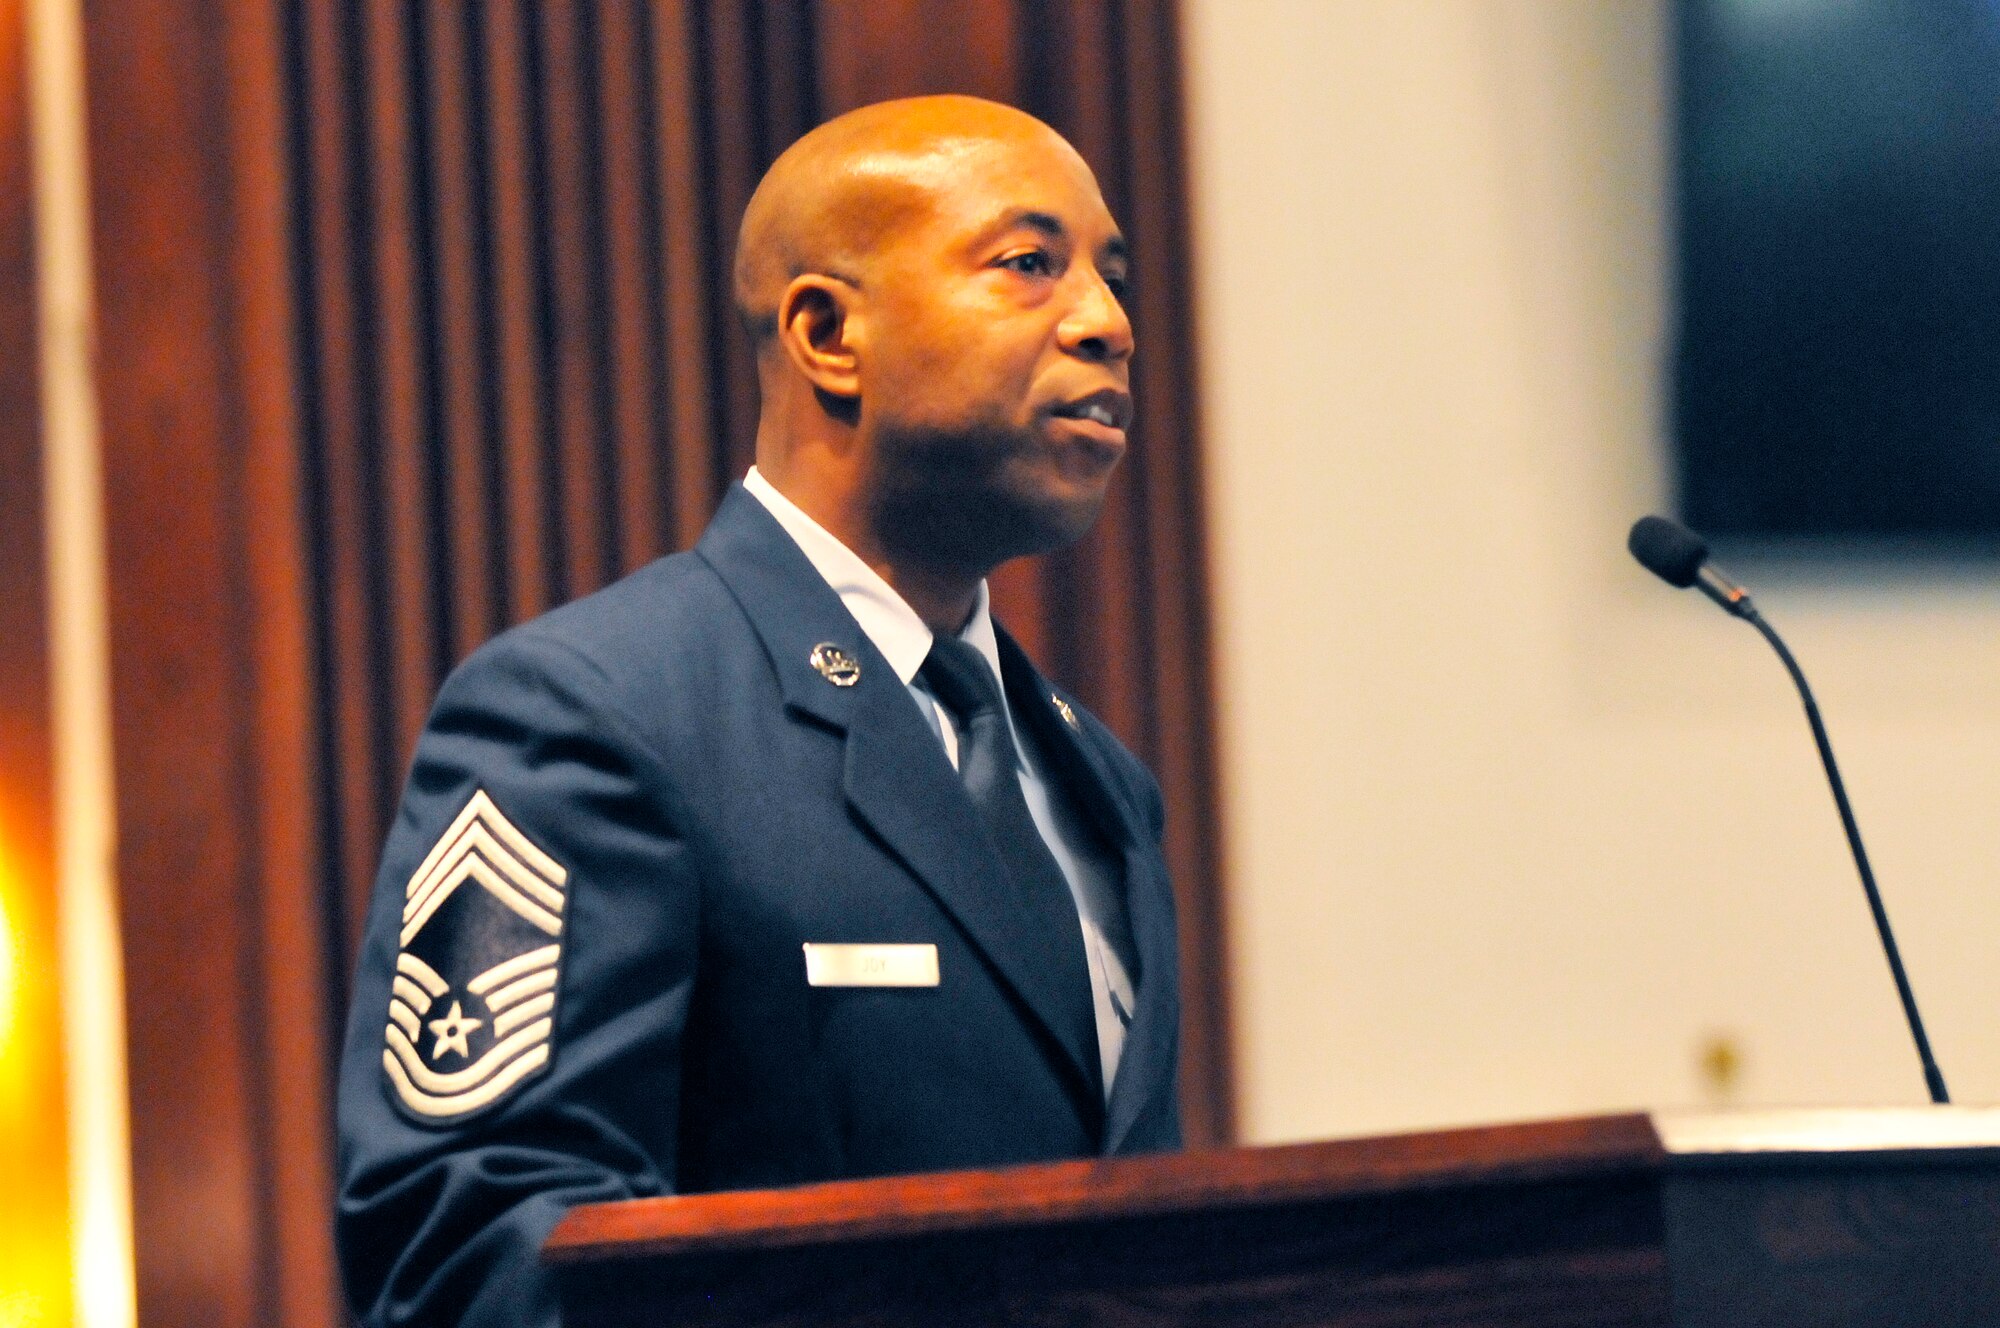 Chief Master Sgt. Gregory C. Joy, 461st MXG/CEM speaks about the influence of Dr. Martin Luther King, Jr.  in his life during a commemorative service, "Celebrating Diversity in the Legacy of Dr. King", Jan. 17 at Robins Chapel. (U. S. Air Force photo/Sue Sapp)